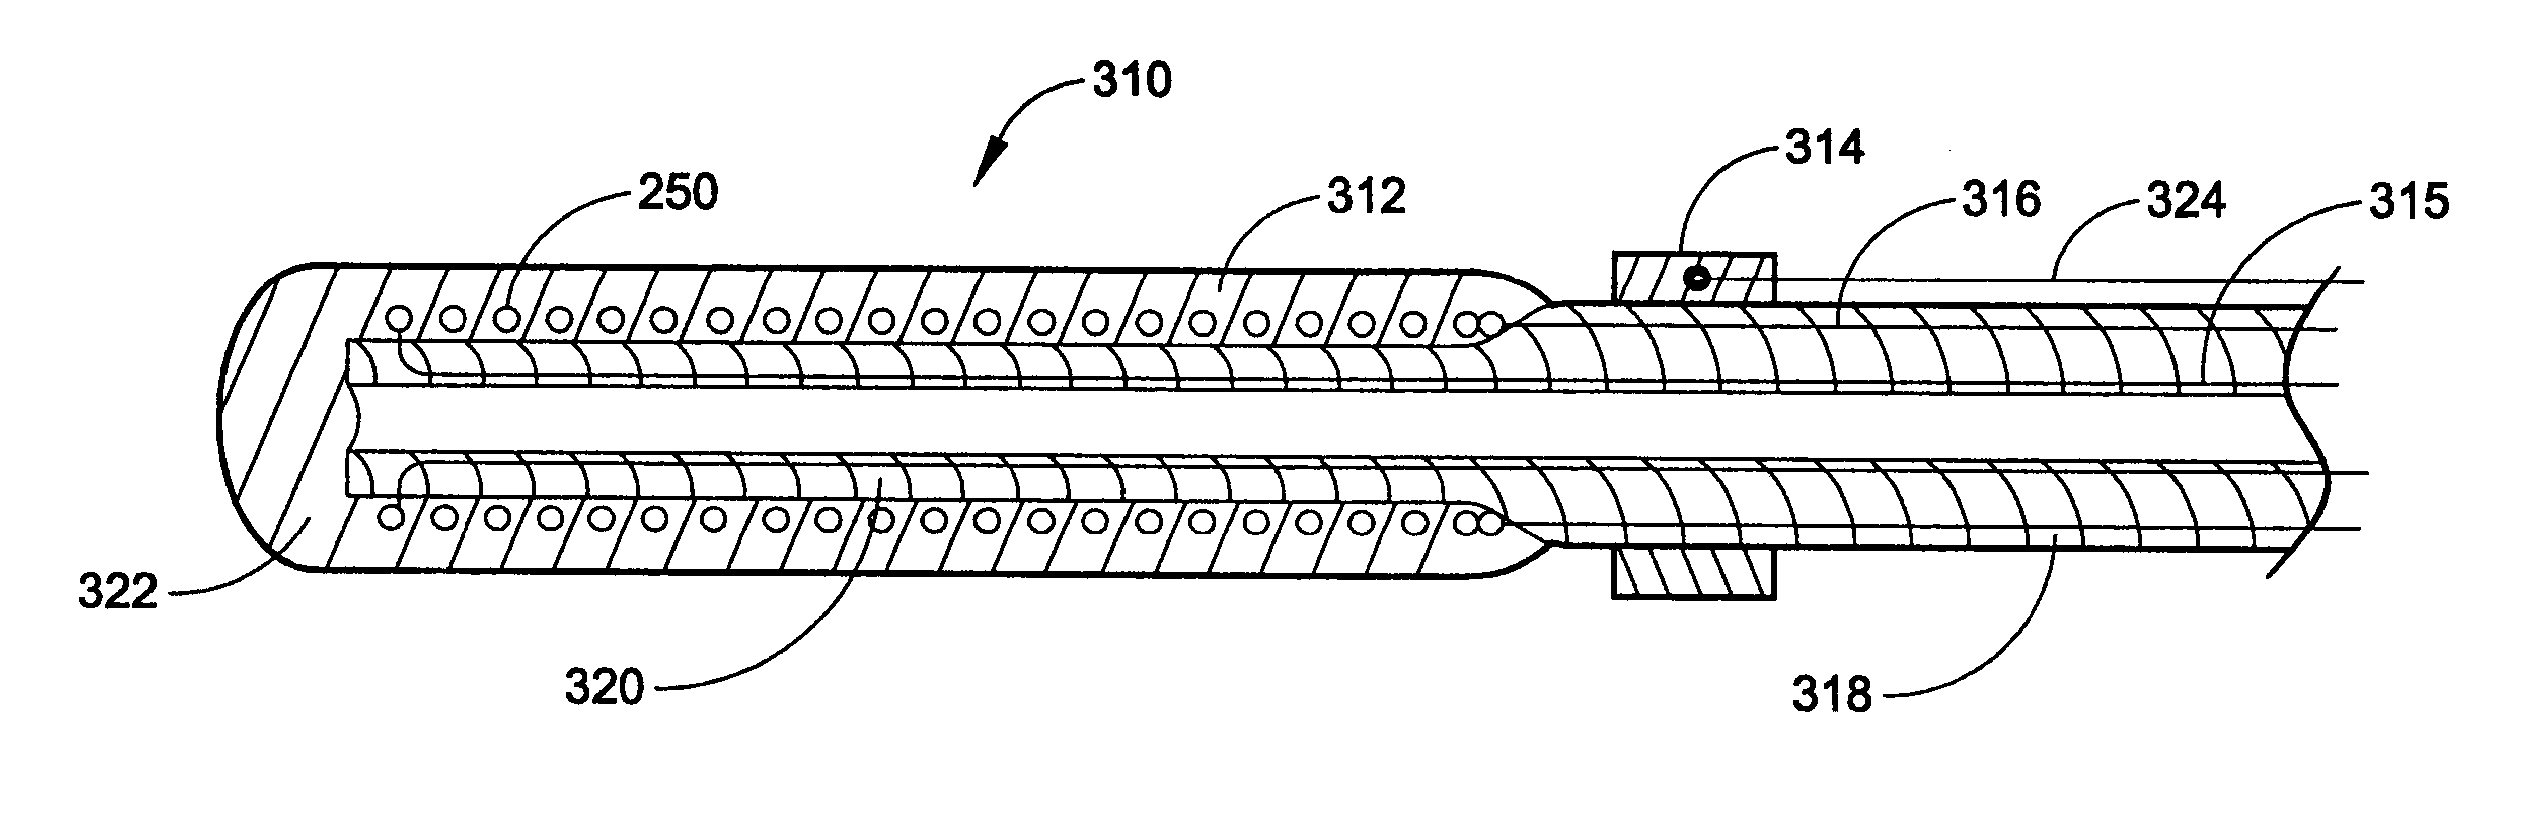 Ablation catheter apparatus with one or more electrodes